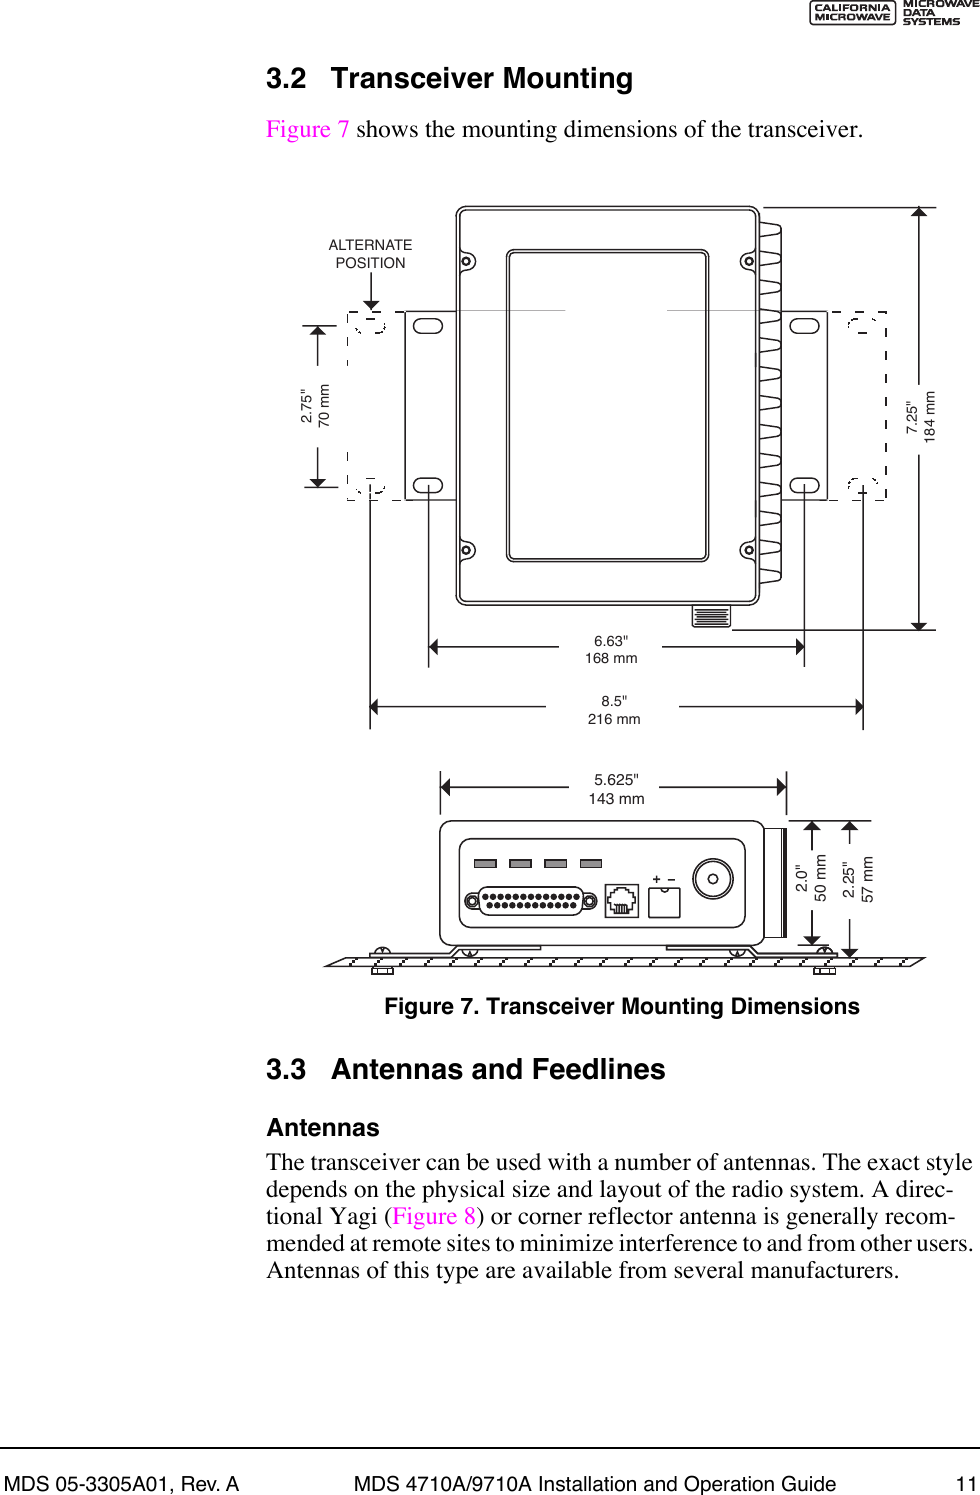 MDS 05-3305A01, Rev. A MDS 4710A/9710A Installation and Operation Guide 113.2 Transceiver MountingFigure 7 shows the mounting dimensions of the transceiver.Invisible place holderFigure 7. Transceiver Mounting Dimensions3.3 Antennas and FeedlinesAntennasThe transceiver can be used with a number of antennas. The exact style depends on the physical size and layout of the radio system. A direc-tional Yagi (Figure 8) or corner reflector antenna is generally recom-mended at remote sites to minimize interference to and from other users. Antennas of this type are available from several manufacturers.8.5&quot;216 mm1.75&quot;4.44 CM6.63&quot;168 mm2.75&quot;70 mm7.25&quot;184 mmALTERNATEPOSITION5.625&quot;143 mm2.25&quot;57 mm2.0&quot;50 mm